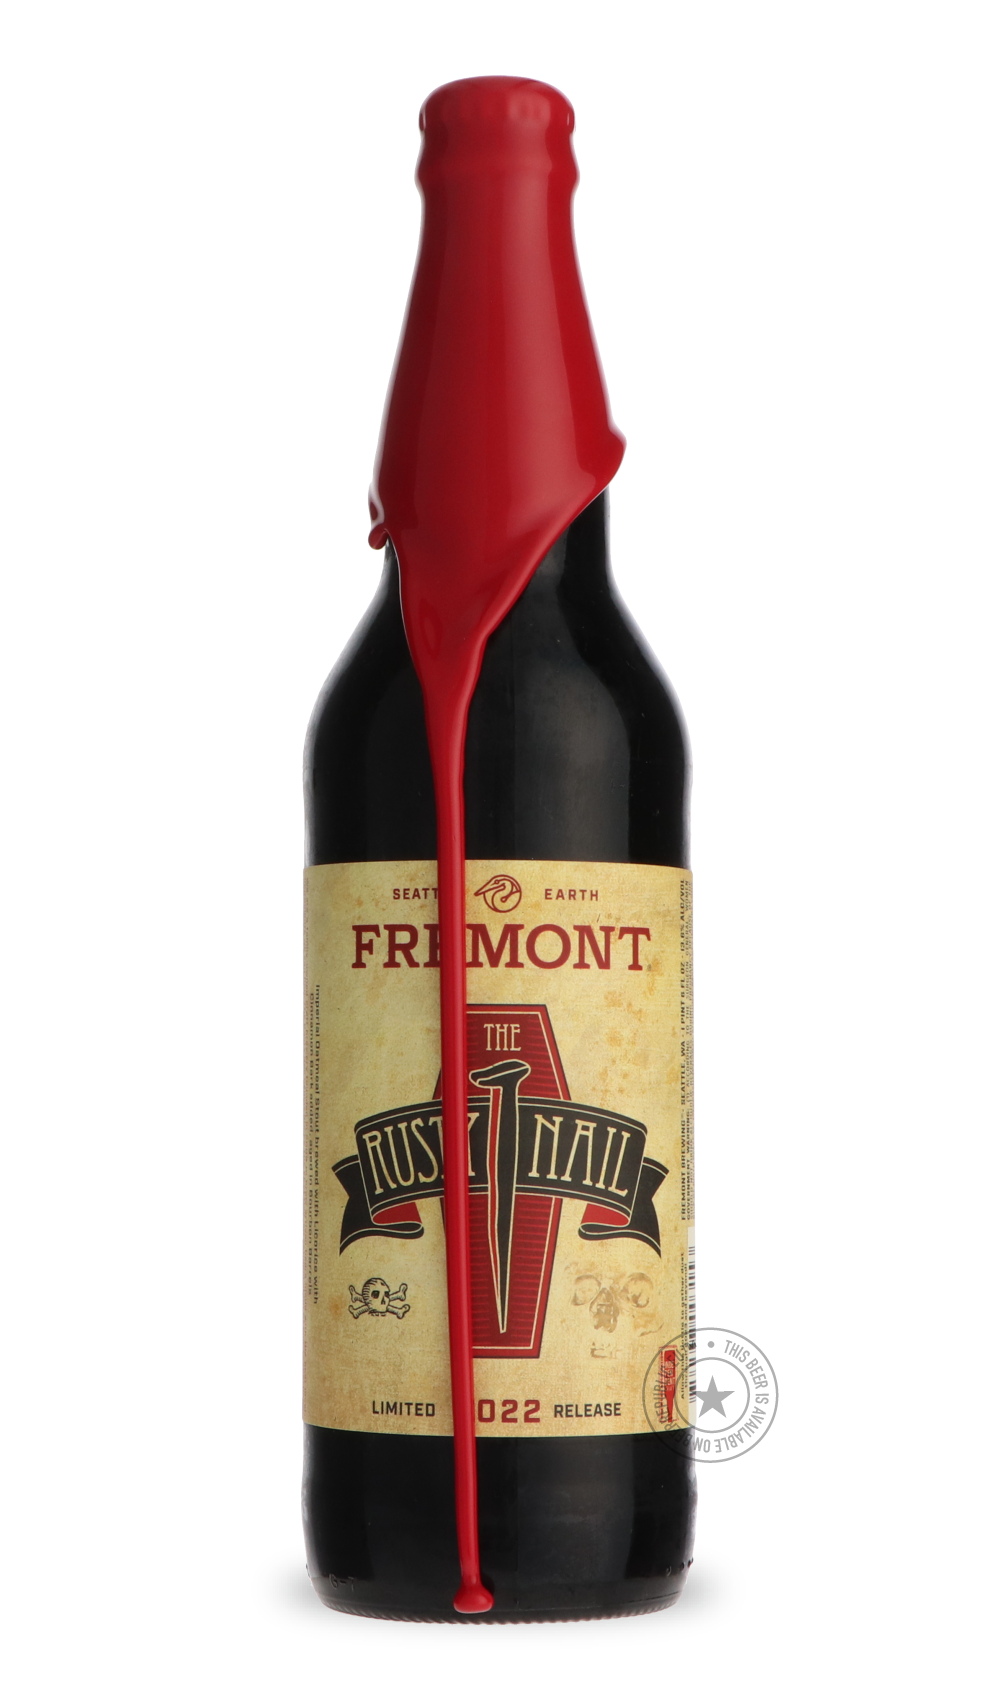 -Fremont- The Rusty Nail 2022-Stout & Porter- Only @ Beer Republic - The best online beer store for American & Canadian craft beer - Buy beer online from the USA and Canada - Bier online kopen - Amerikaans bier kopen - Craft beer store - Craft beer kopen - Amerikanisch bier kaufen - Bier online kaufen - Acheter biere online - IPA - Stout - Porter - New England IPA - Hazy IPA - Imperial Stout - Barrel Aged - Barrel Aged Imperial Stout - Brown - Dark beer - Blond - Blonde - Pilsner - Lager - Wheat - Weizen - 